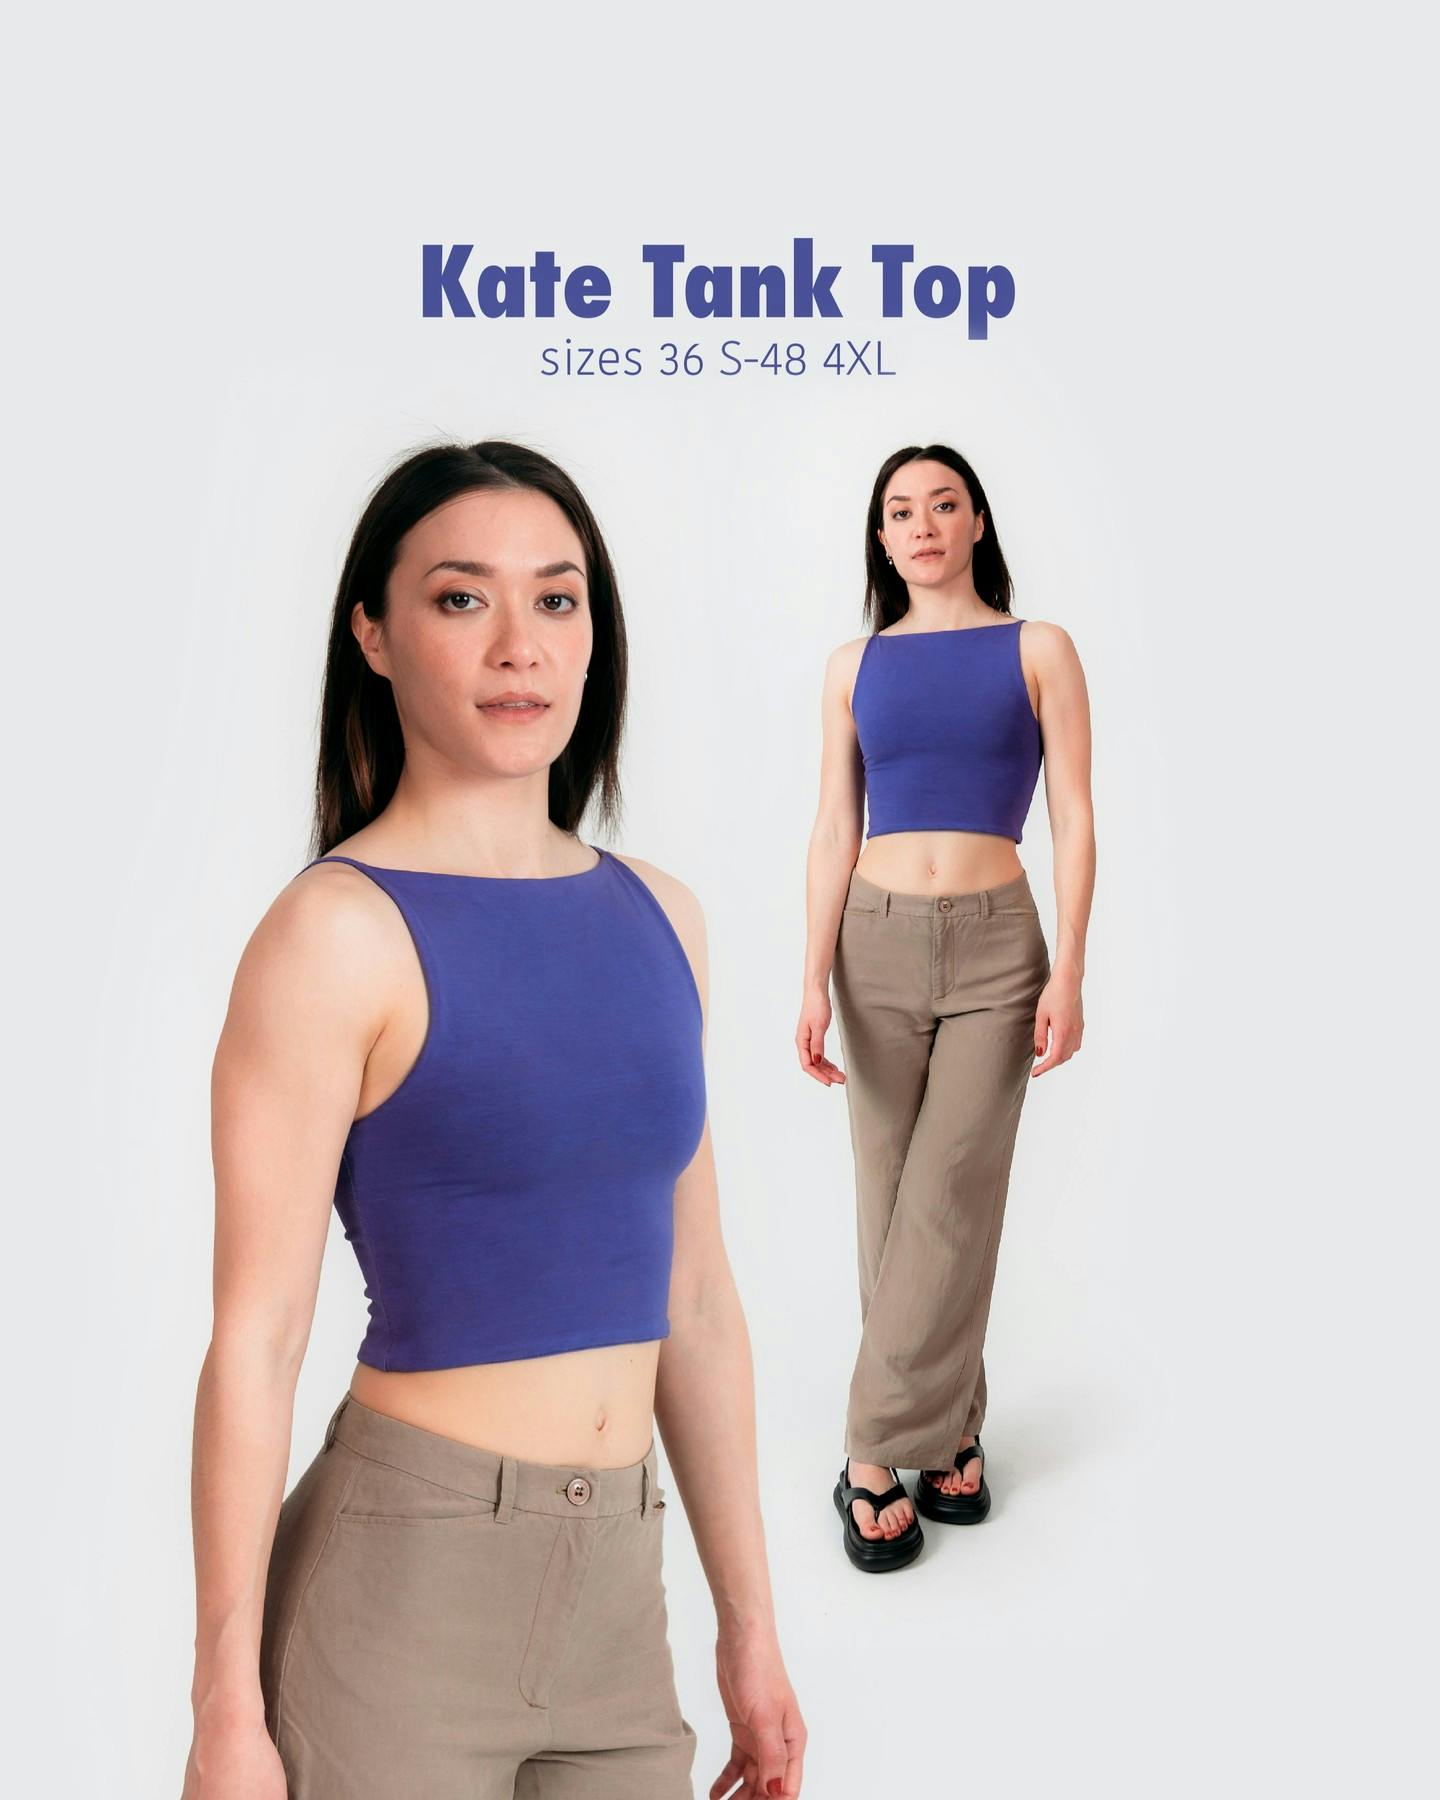 Happy Monday everyone! Here's the Kate take top, a 90s inspired minimal tank top. Once again I used some cotton jersey for this pattern, which is one of my favorite fabrics to work with and wear for tops. It features a boat neckline, little straps, and it's double-sided. Inspo is the 90s, in particular Calvin Klein - find pics in the end (1997)! I made a dress using this pattern combined with my Eta knit skirt pattern which is an older pattern of mine, I'll publish the video tutorial in a bit.
Also, I must say that this blue version is cropped, so the actual pattern is longer - I often make a version with more as it's easy to make less with it.
Click the link in bio to watch the #katediytop tutorial and head to the description to get the pattern half price on my shops. 
Kissy emoji!
.
.
.
#sewingpattern #sewistsofinstagram #memade